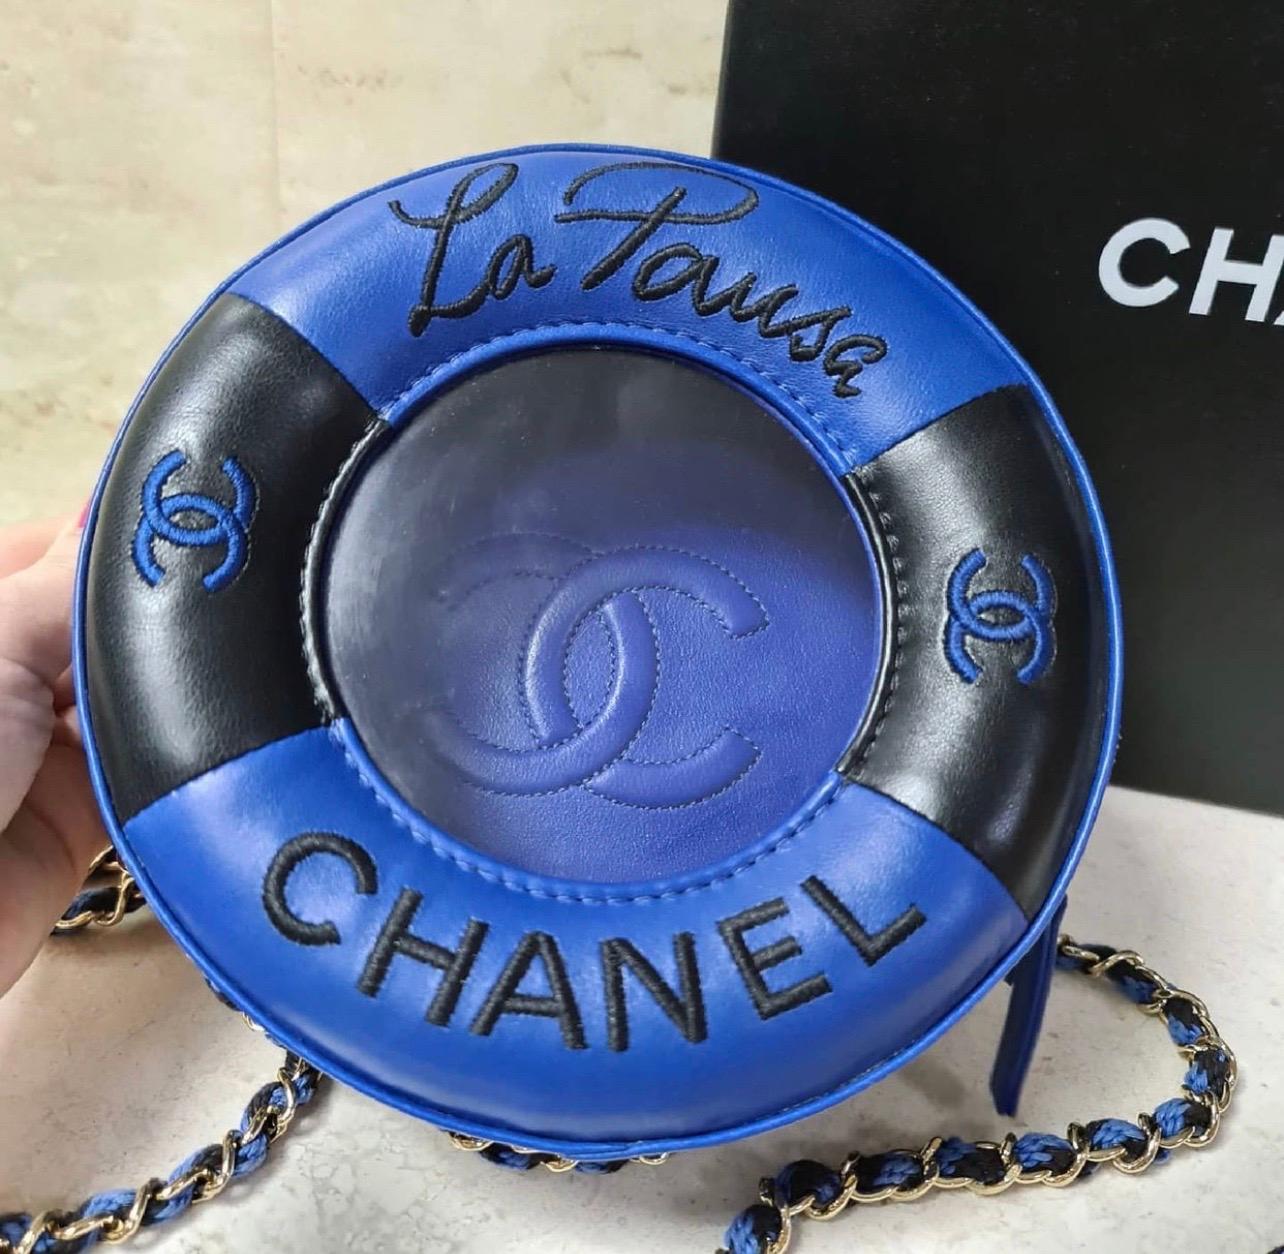 This Chanel Lifesaver Round Crossbody Bag Lambskin, crafted from black and blue leather, features woven-in canvas chain link strap with shoulder strap and gold-tone hardware.
Its zip-around closure opens to a blue leather interior. 

Condition: